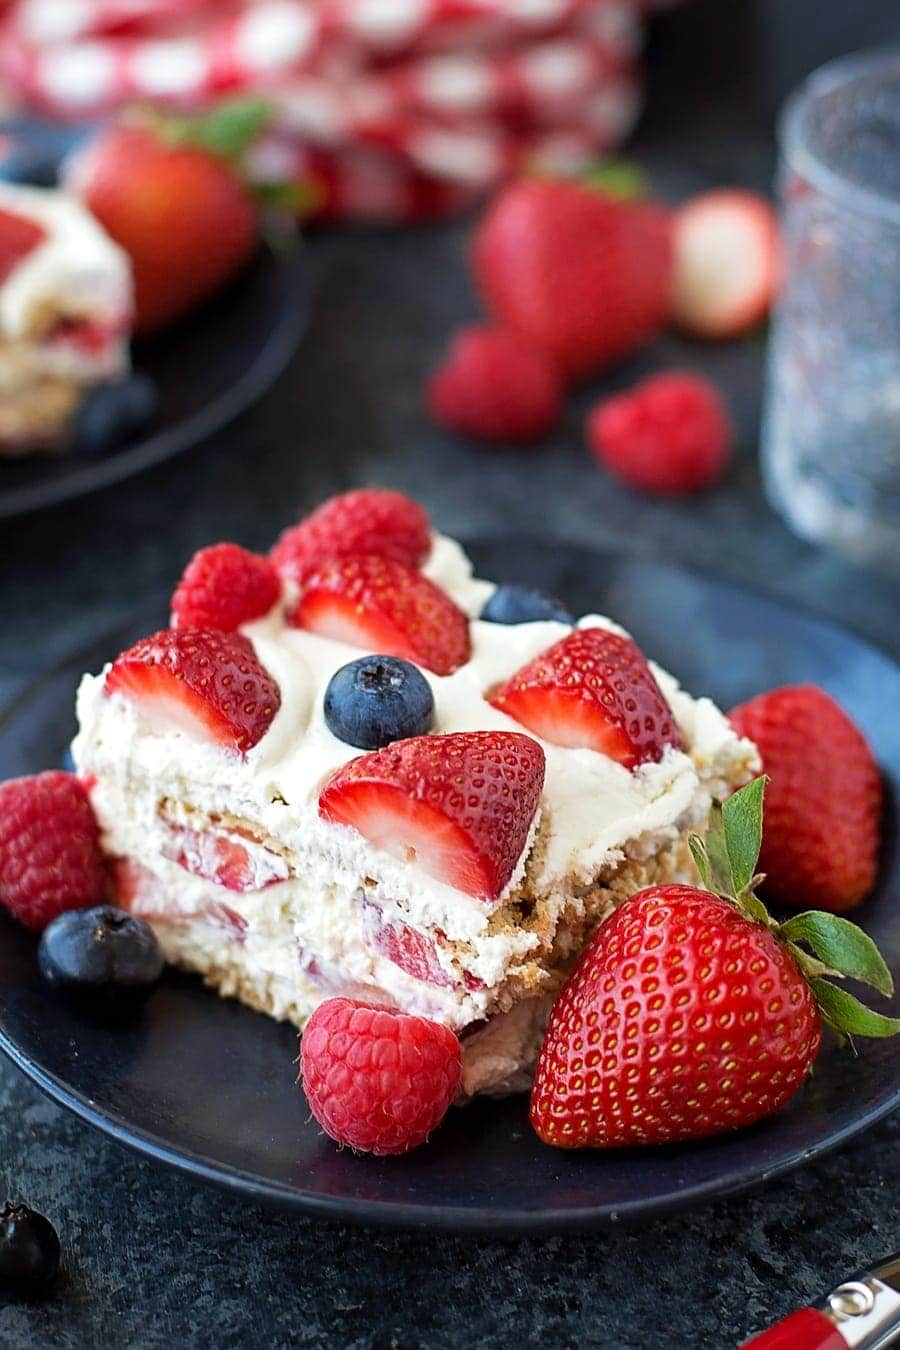 4th of July Desserts - No Bake berry ice box cake topped with fresh berries.